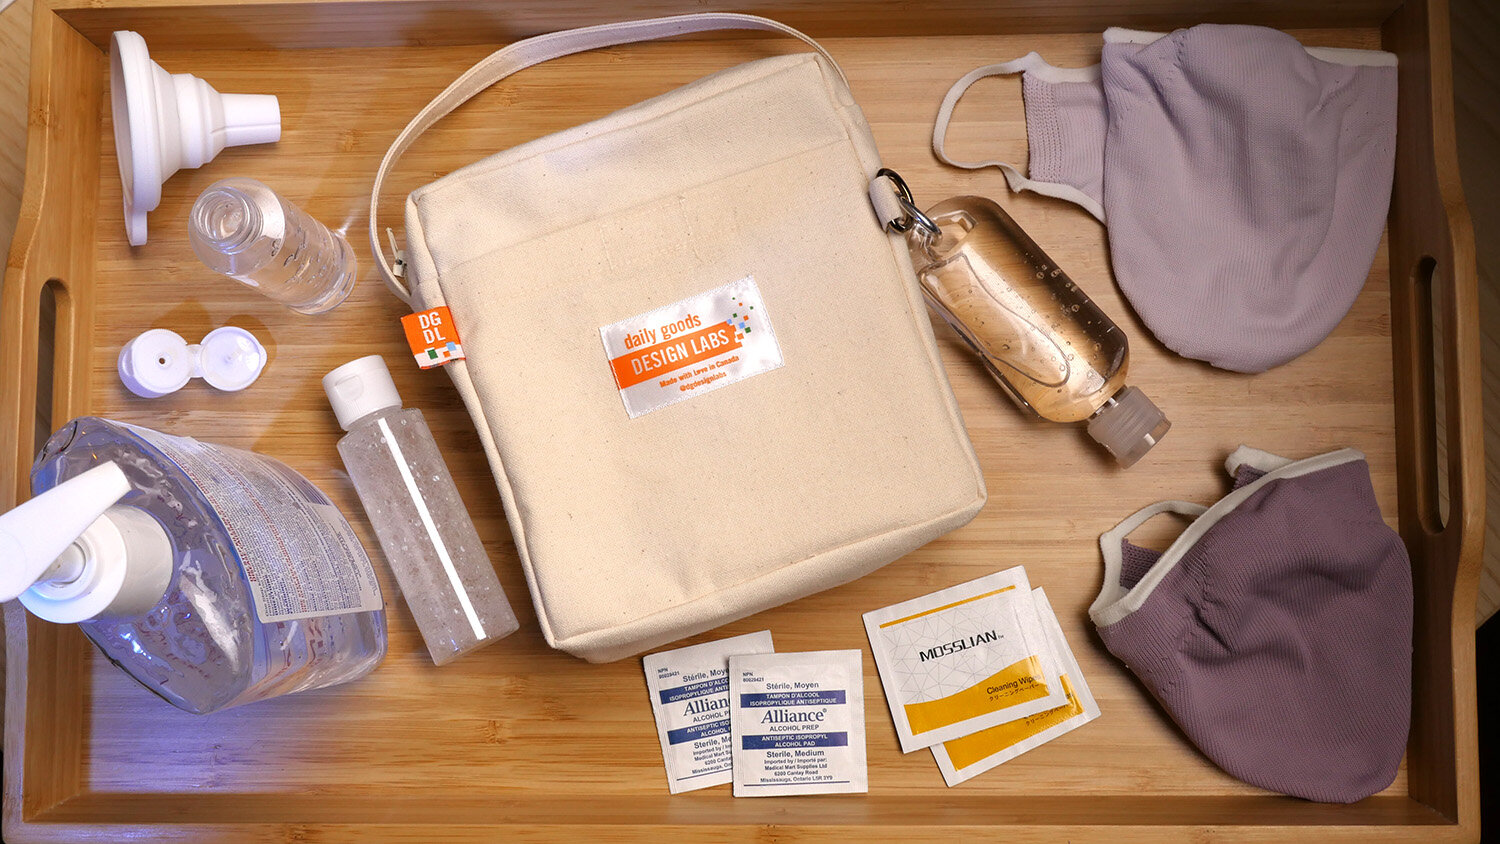 The Covid Essentials Kit - travel inspired ™ — Daily Goods Design LABS